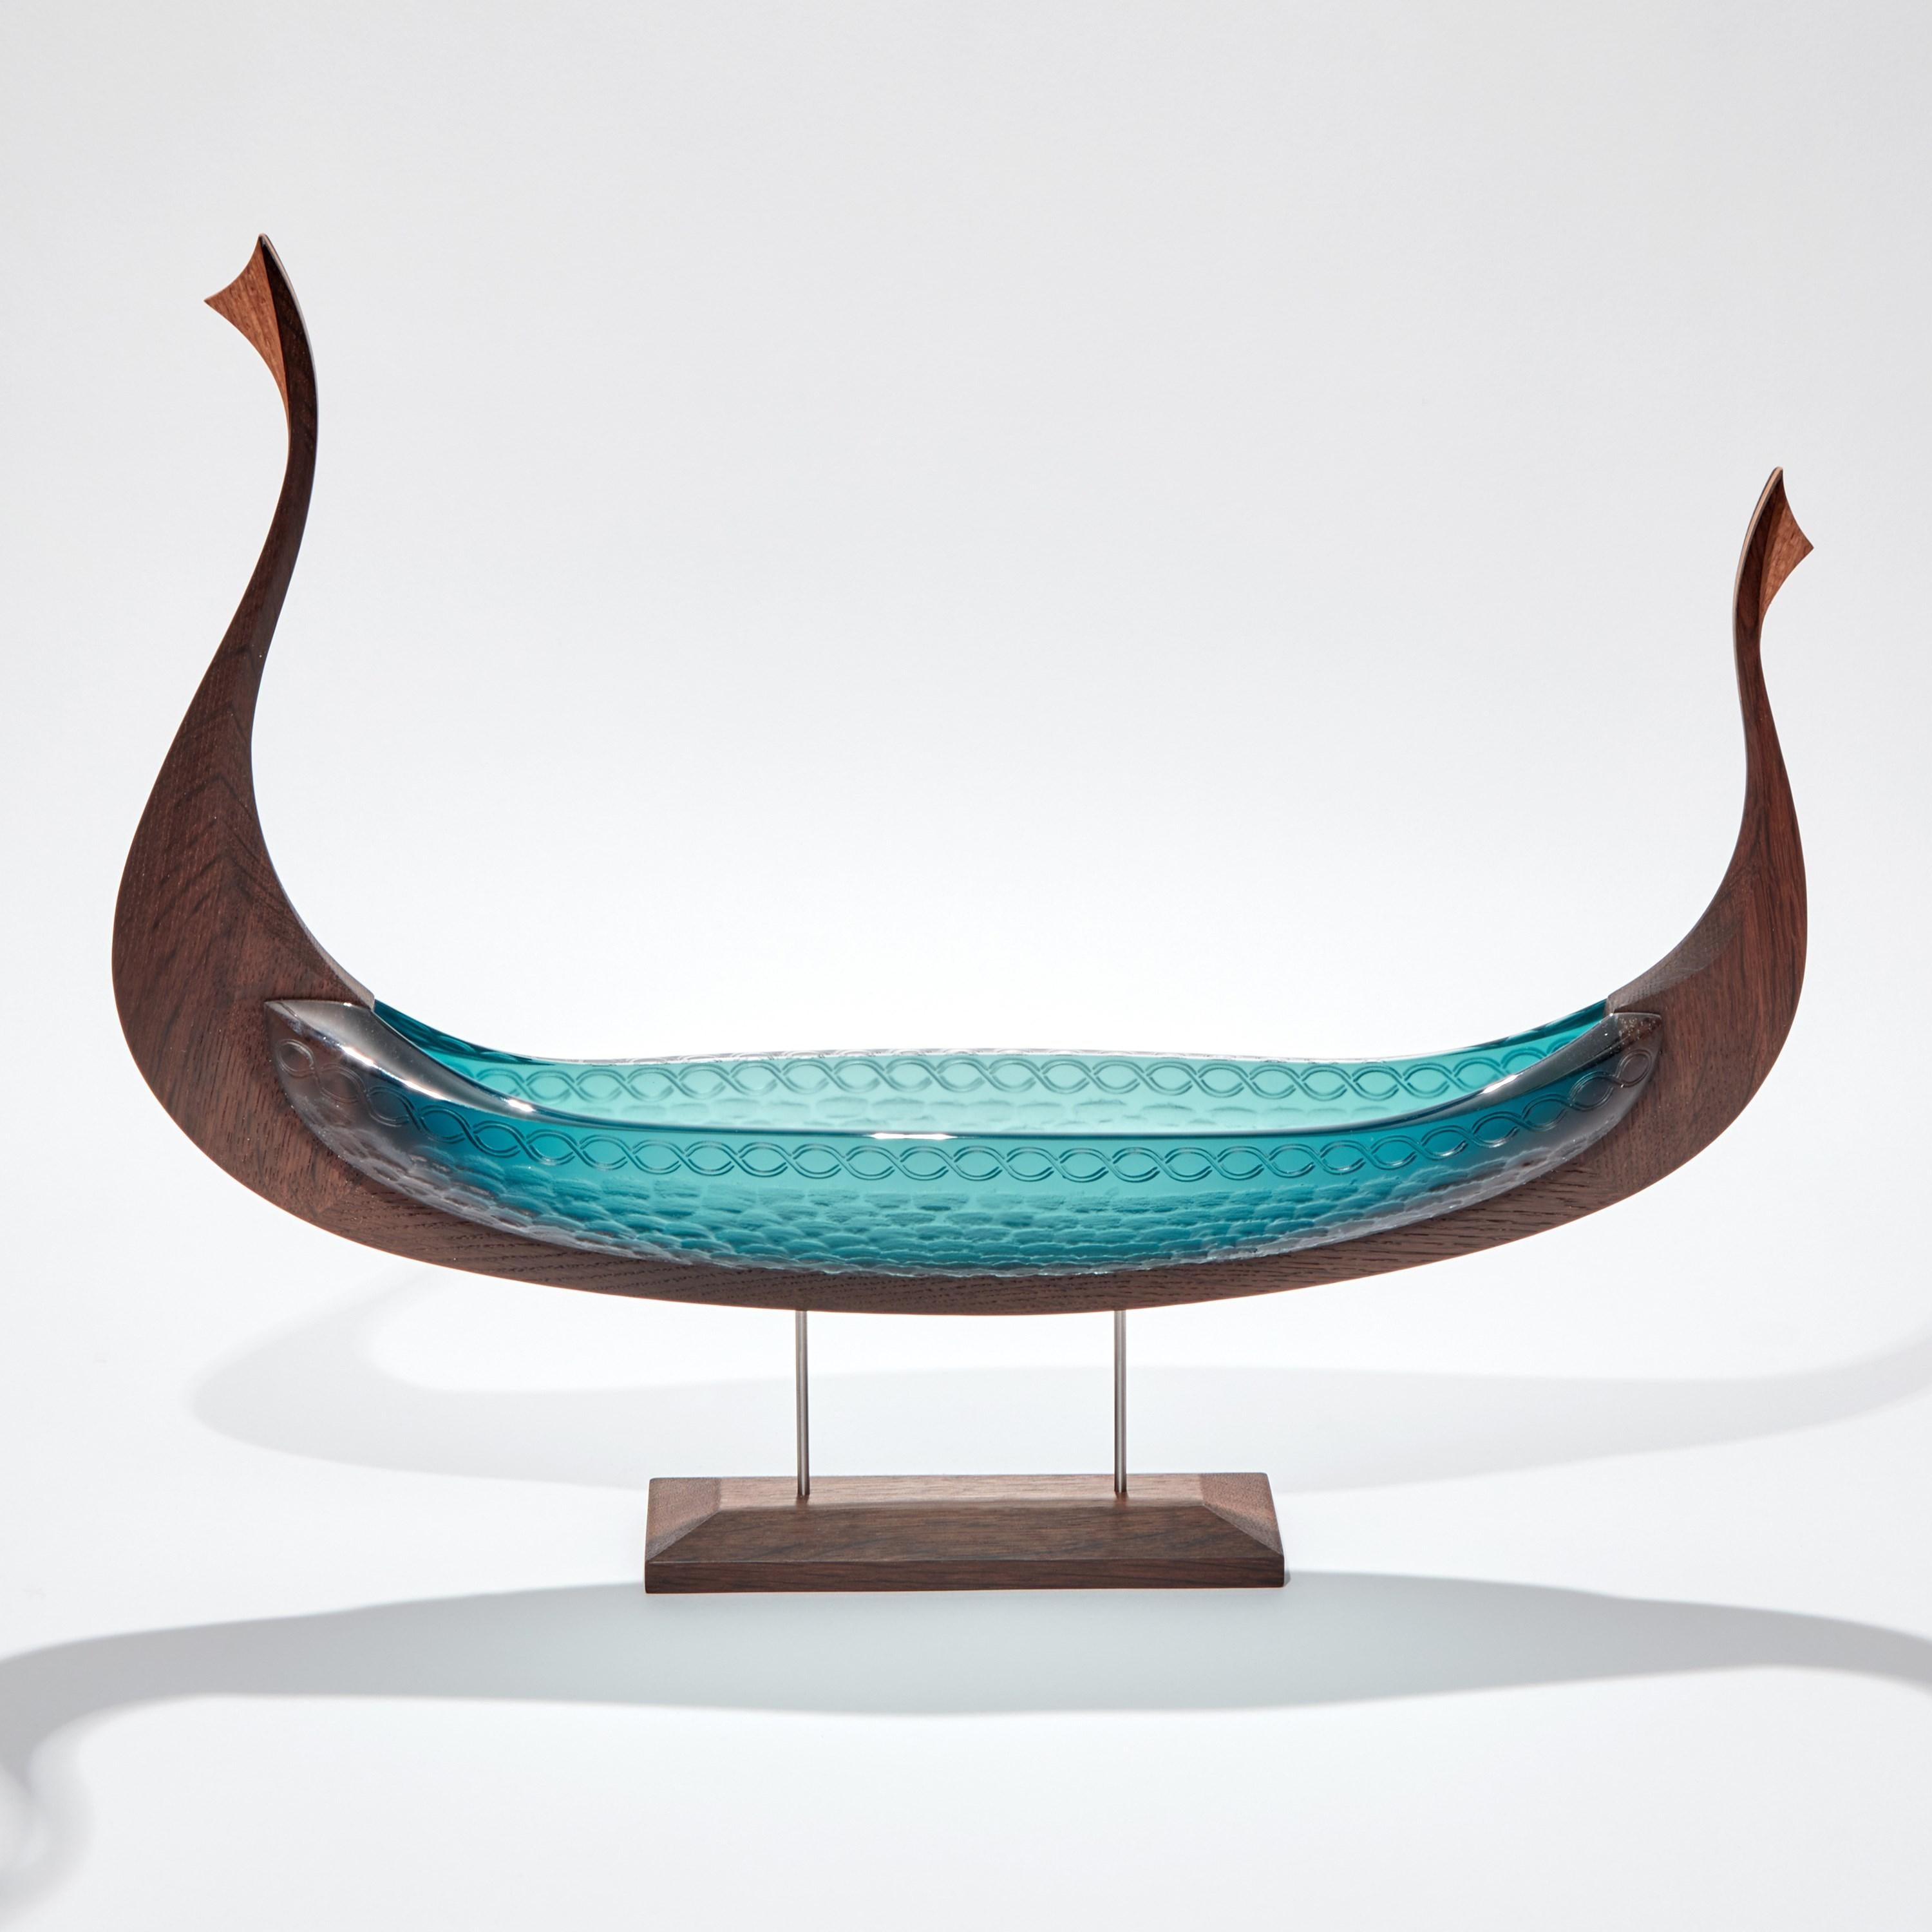 Fine cabinet making & crafted oak with handblown & cut teal aqua glass combine to create this unique sculpture 